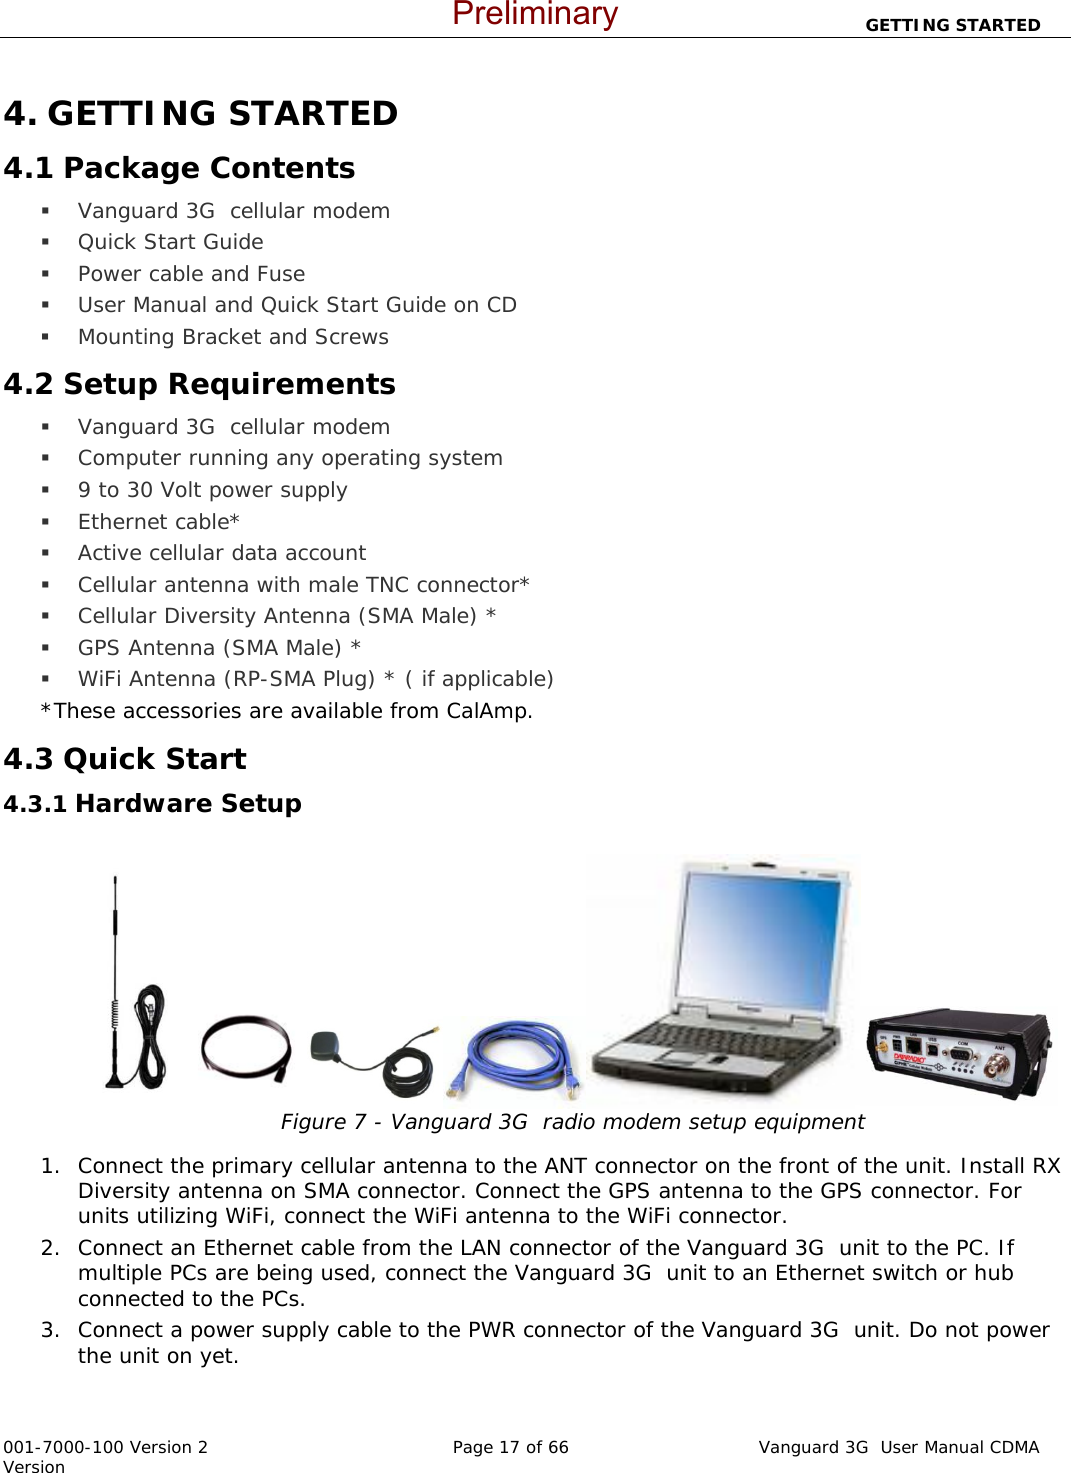                          GETTING STARTED  001-7000-100 Version 2       Page 17 of 66       Vanguard 3G  User Manual CDMA Version 4. GETTING STARTED 4.1 Package Contents  Vanguard 3G  cellular modem  Quick Start Guide  Power cable and Fuse  User Manual and Quick Start Guide on CD  Mounting Bracket and Screws 4.2 Setup Requirements  Vanguard 3G  cellular modem  Computer running any operating system  9 to 30 Volt power supply   Ethernet cable*  Active cellular data account   Cellular antenna with male TNC connector*  Cellular Diversity Antenna (SMA Male) *  GPS Antenna (SMA Male) *  WiFi Antenna (RP-SMA Plug) * ( if applicable) *These accessories are available from CalAmp. 4.3 Quick Start 4.3.1 Hardware Setup   Figure 7 - Vanguard 3G  radio modem setup equipment   1. Connect the primary cellular antenna to the ANT connector on the front of the unit. Install RX Diversity antenna on SMA connector. Connect the GPS antenna to the GPS connector. For units utilizing WiFi, connect the WiFi antenna to the WiFi connector. 2. Connect an Ethernet cable from the LAN connector of the Vanguard 3G  unit to the PC. If multiple PCs are being used, connect the Vanguard 3G  unit to an Ethernet switch or hub connected to the PCs.   3. Connect a power supply cable to the PWR connector of the Vanguard 3G  unit. Do not power the unit on yet.   Preliminary